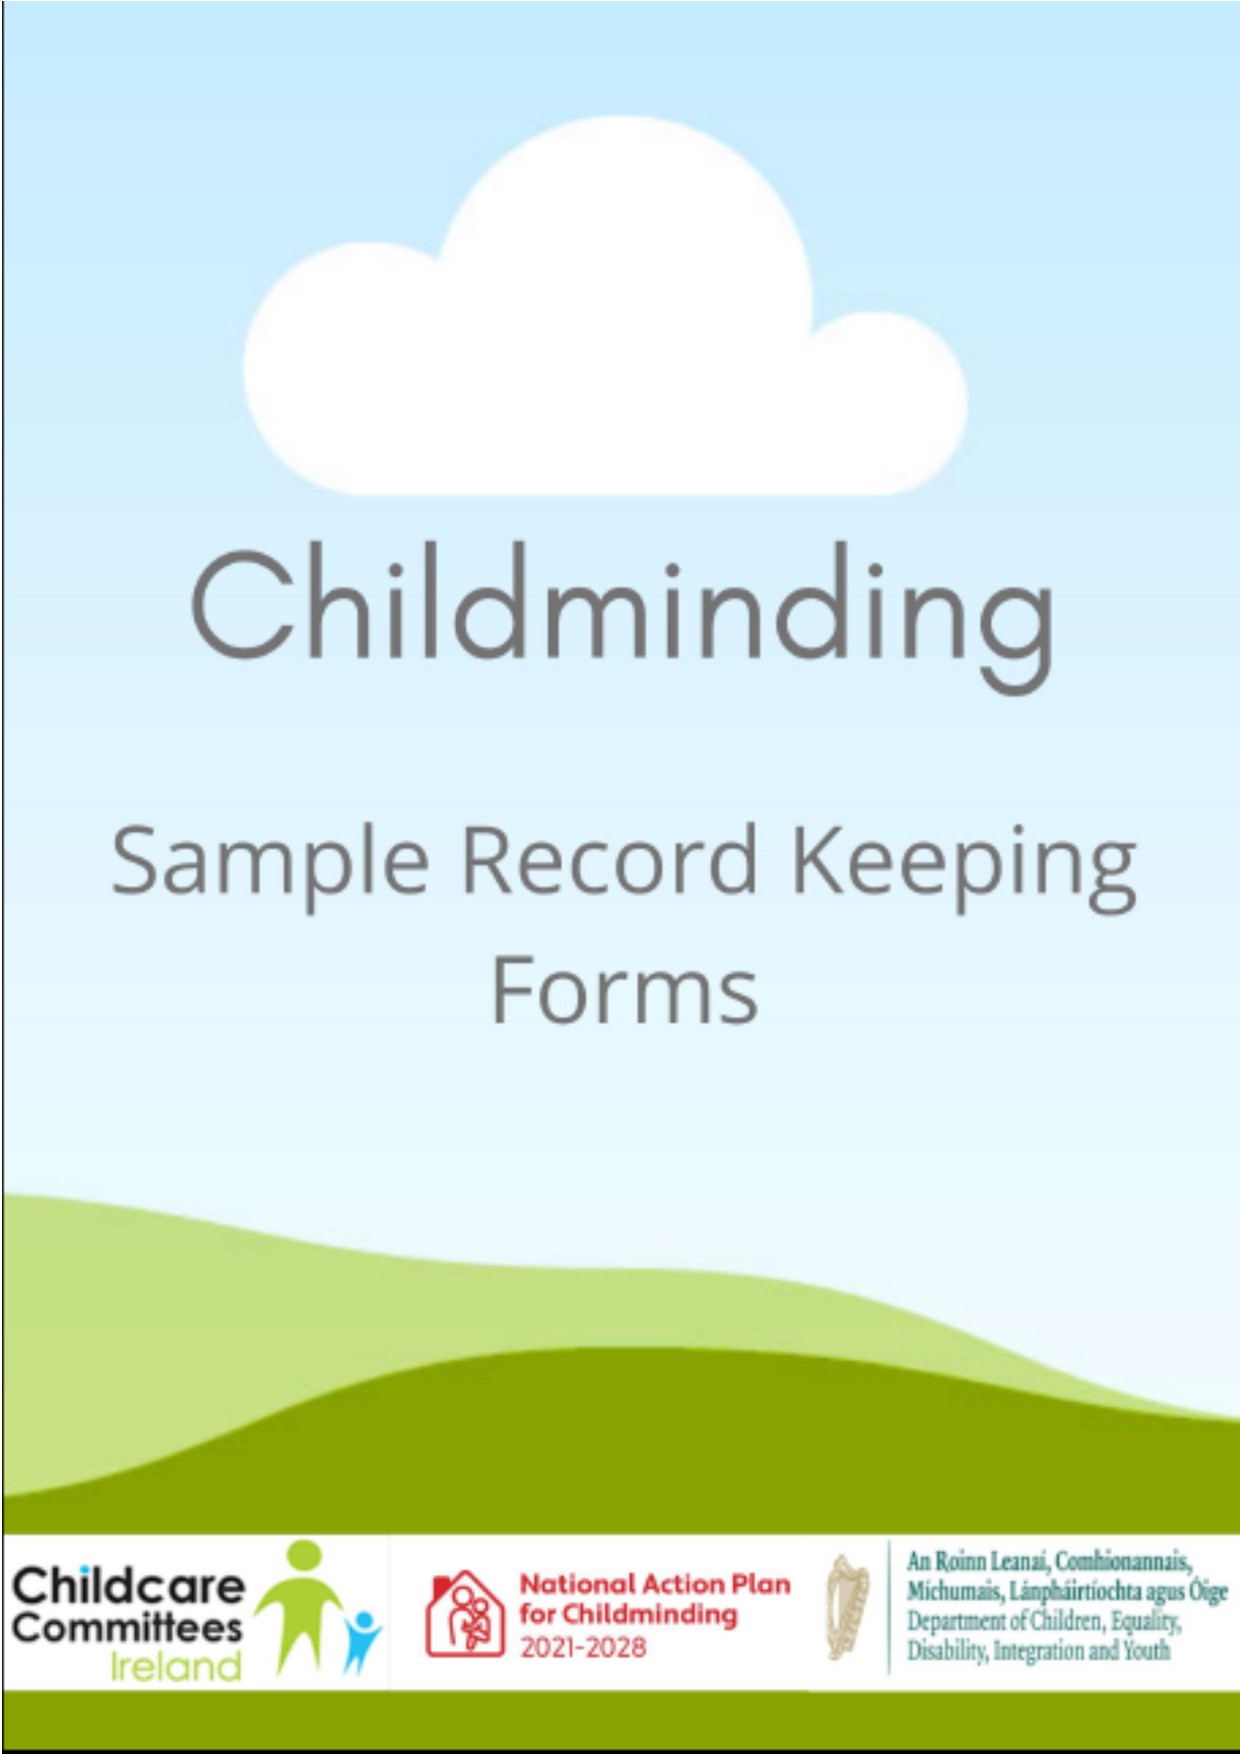 Childminding Sample Record Keeping Forms